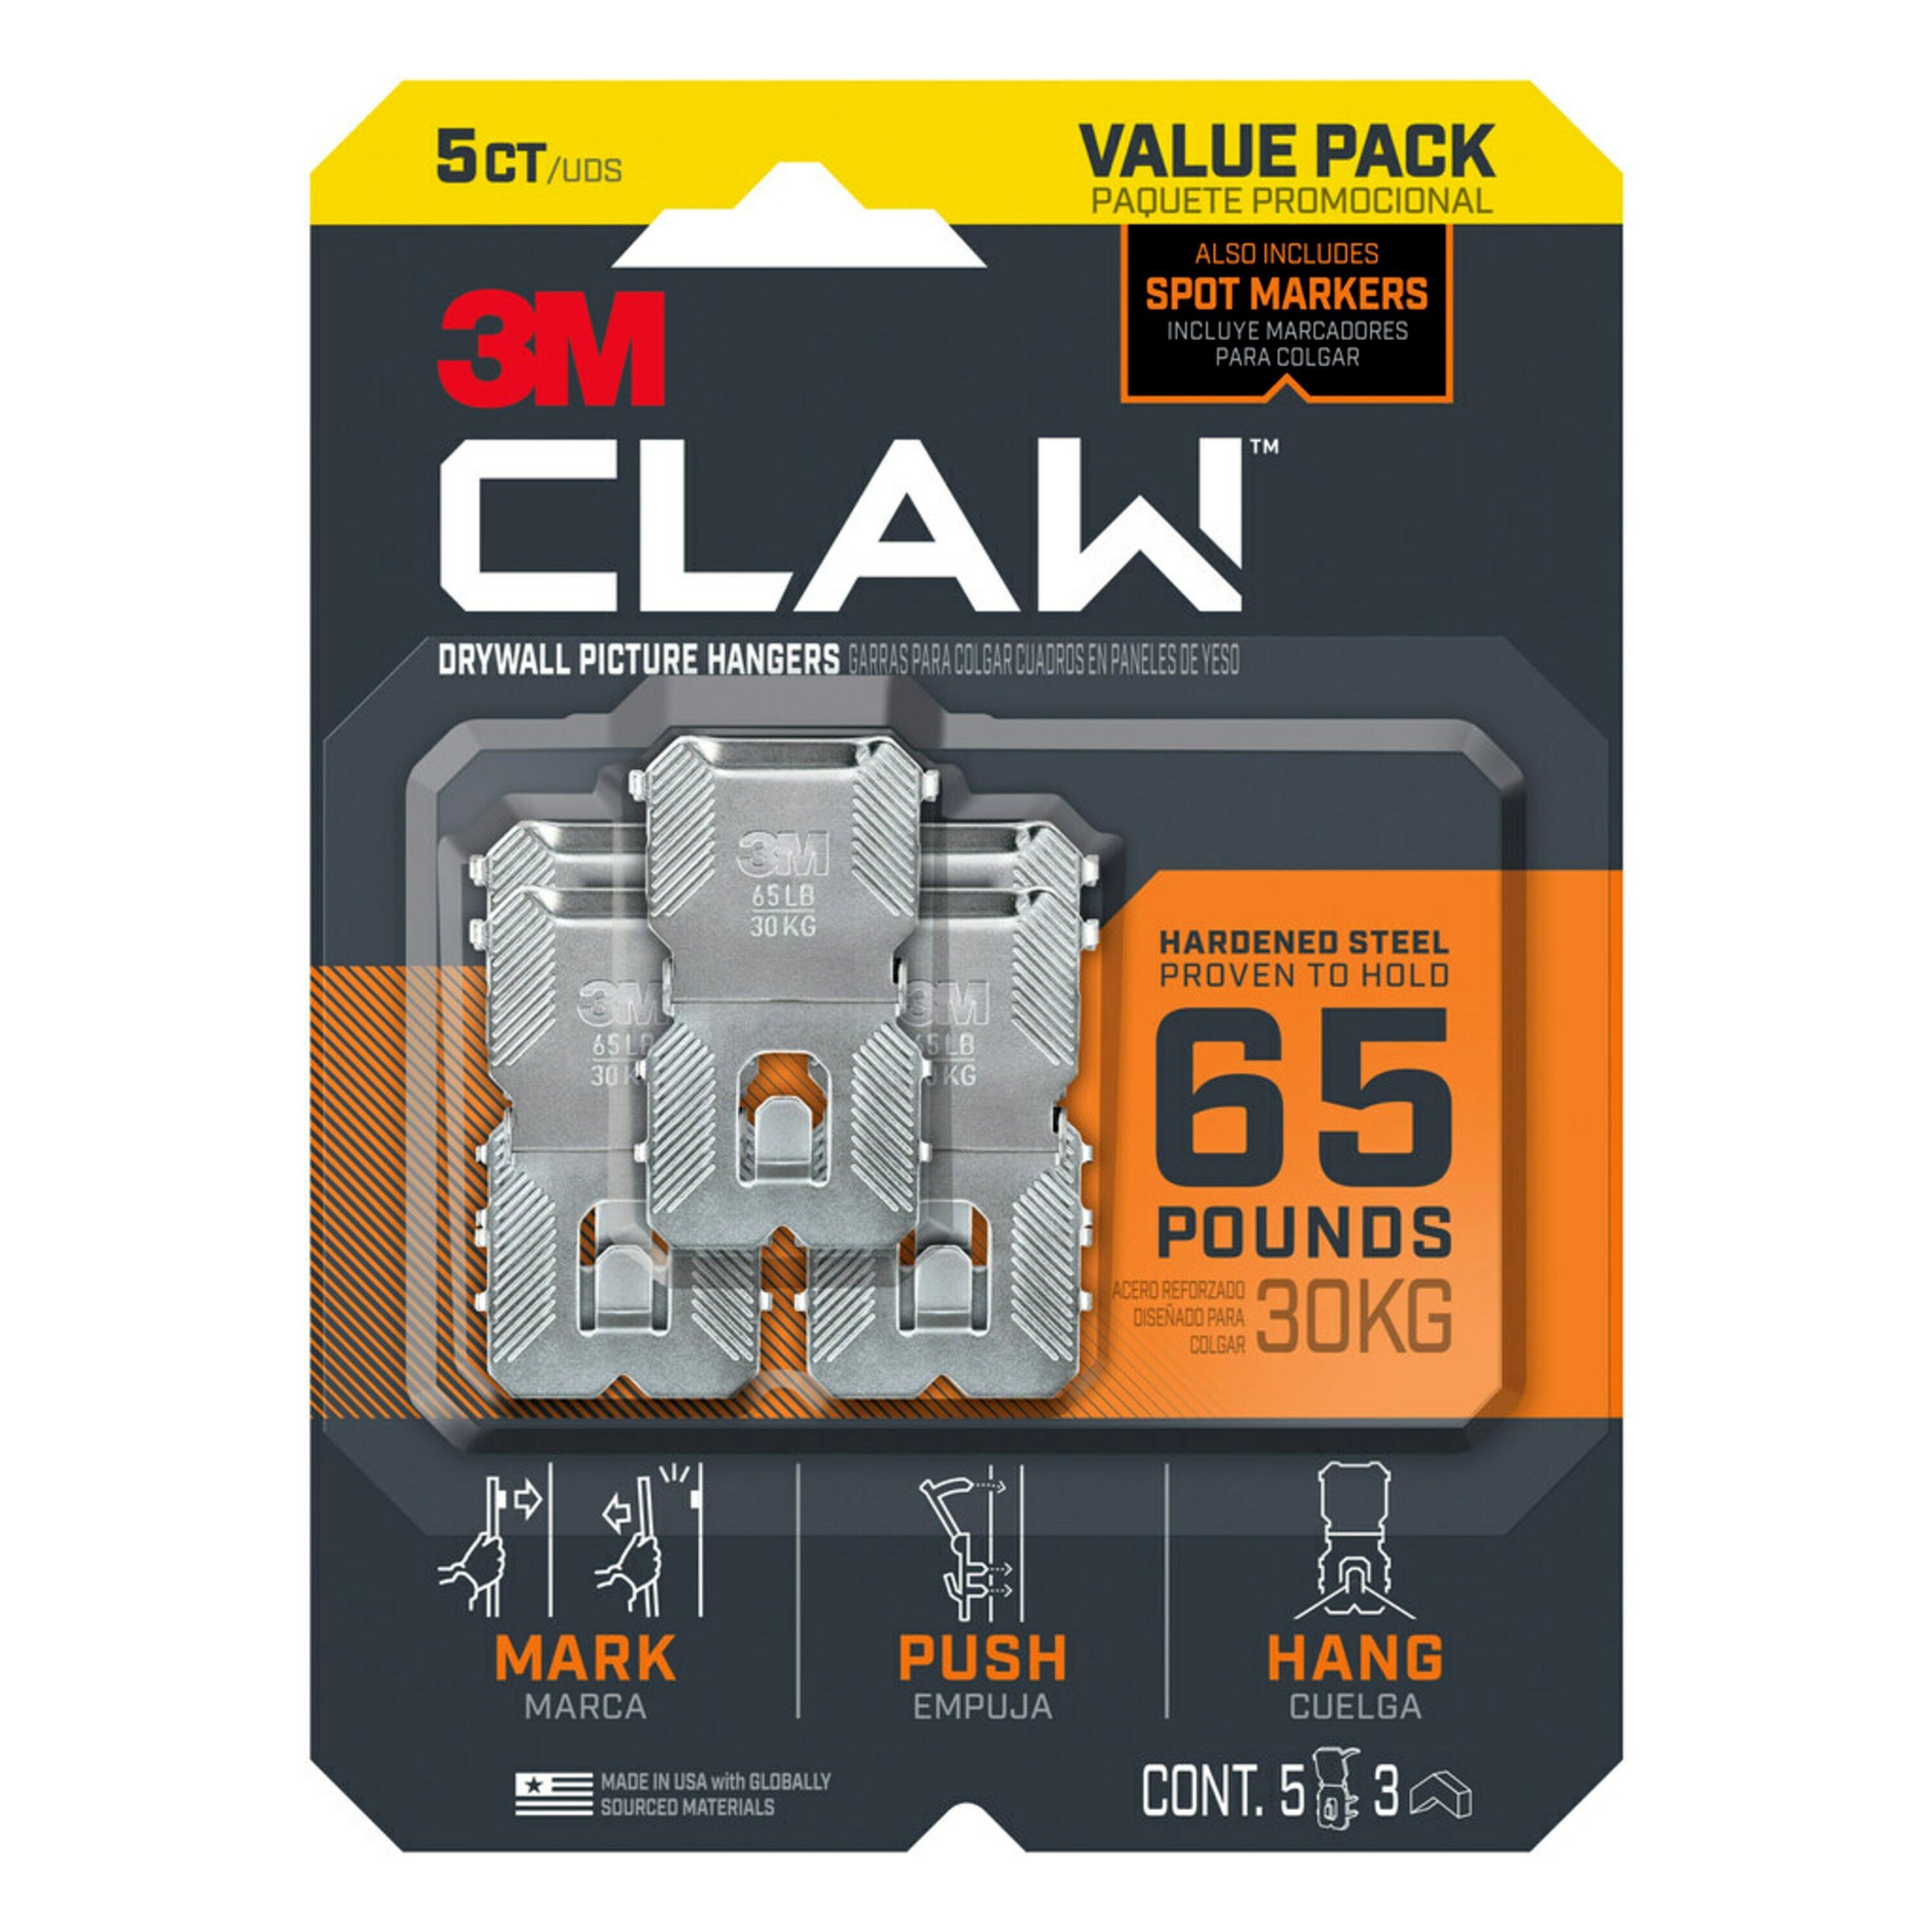 3M 3m Claw Drywall Picture Hangers 65lb with Temporary Spot